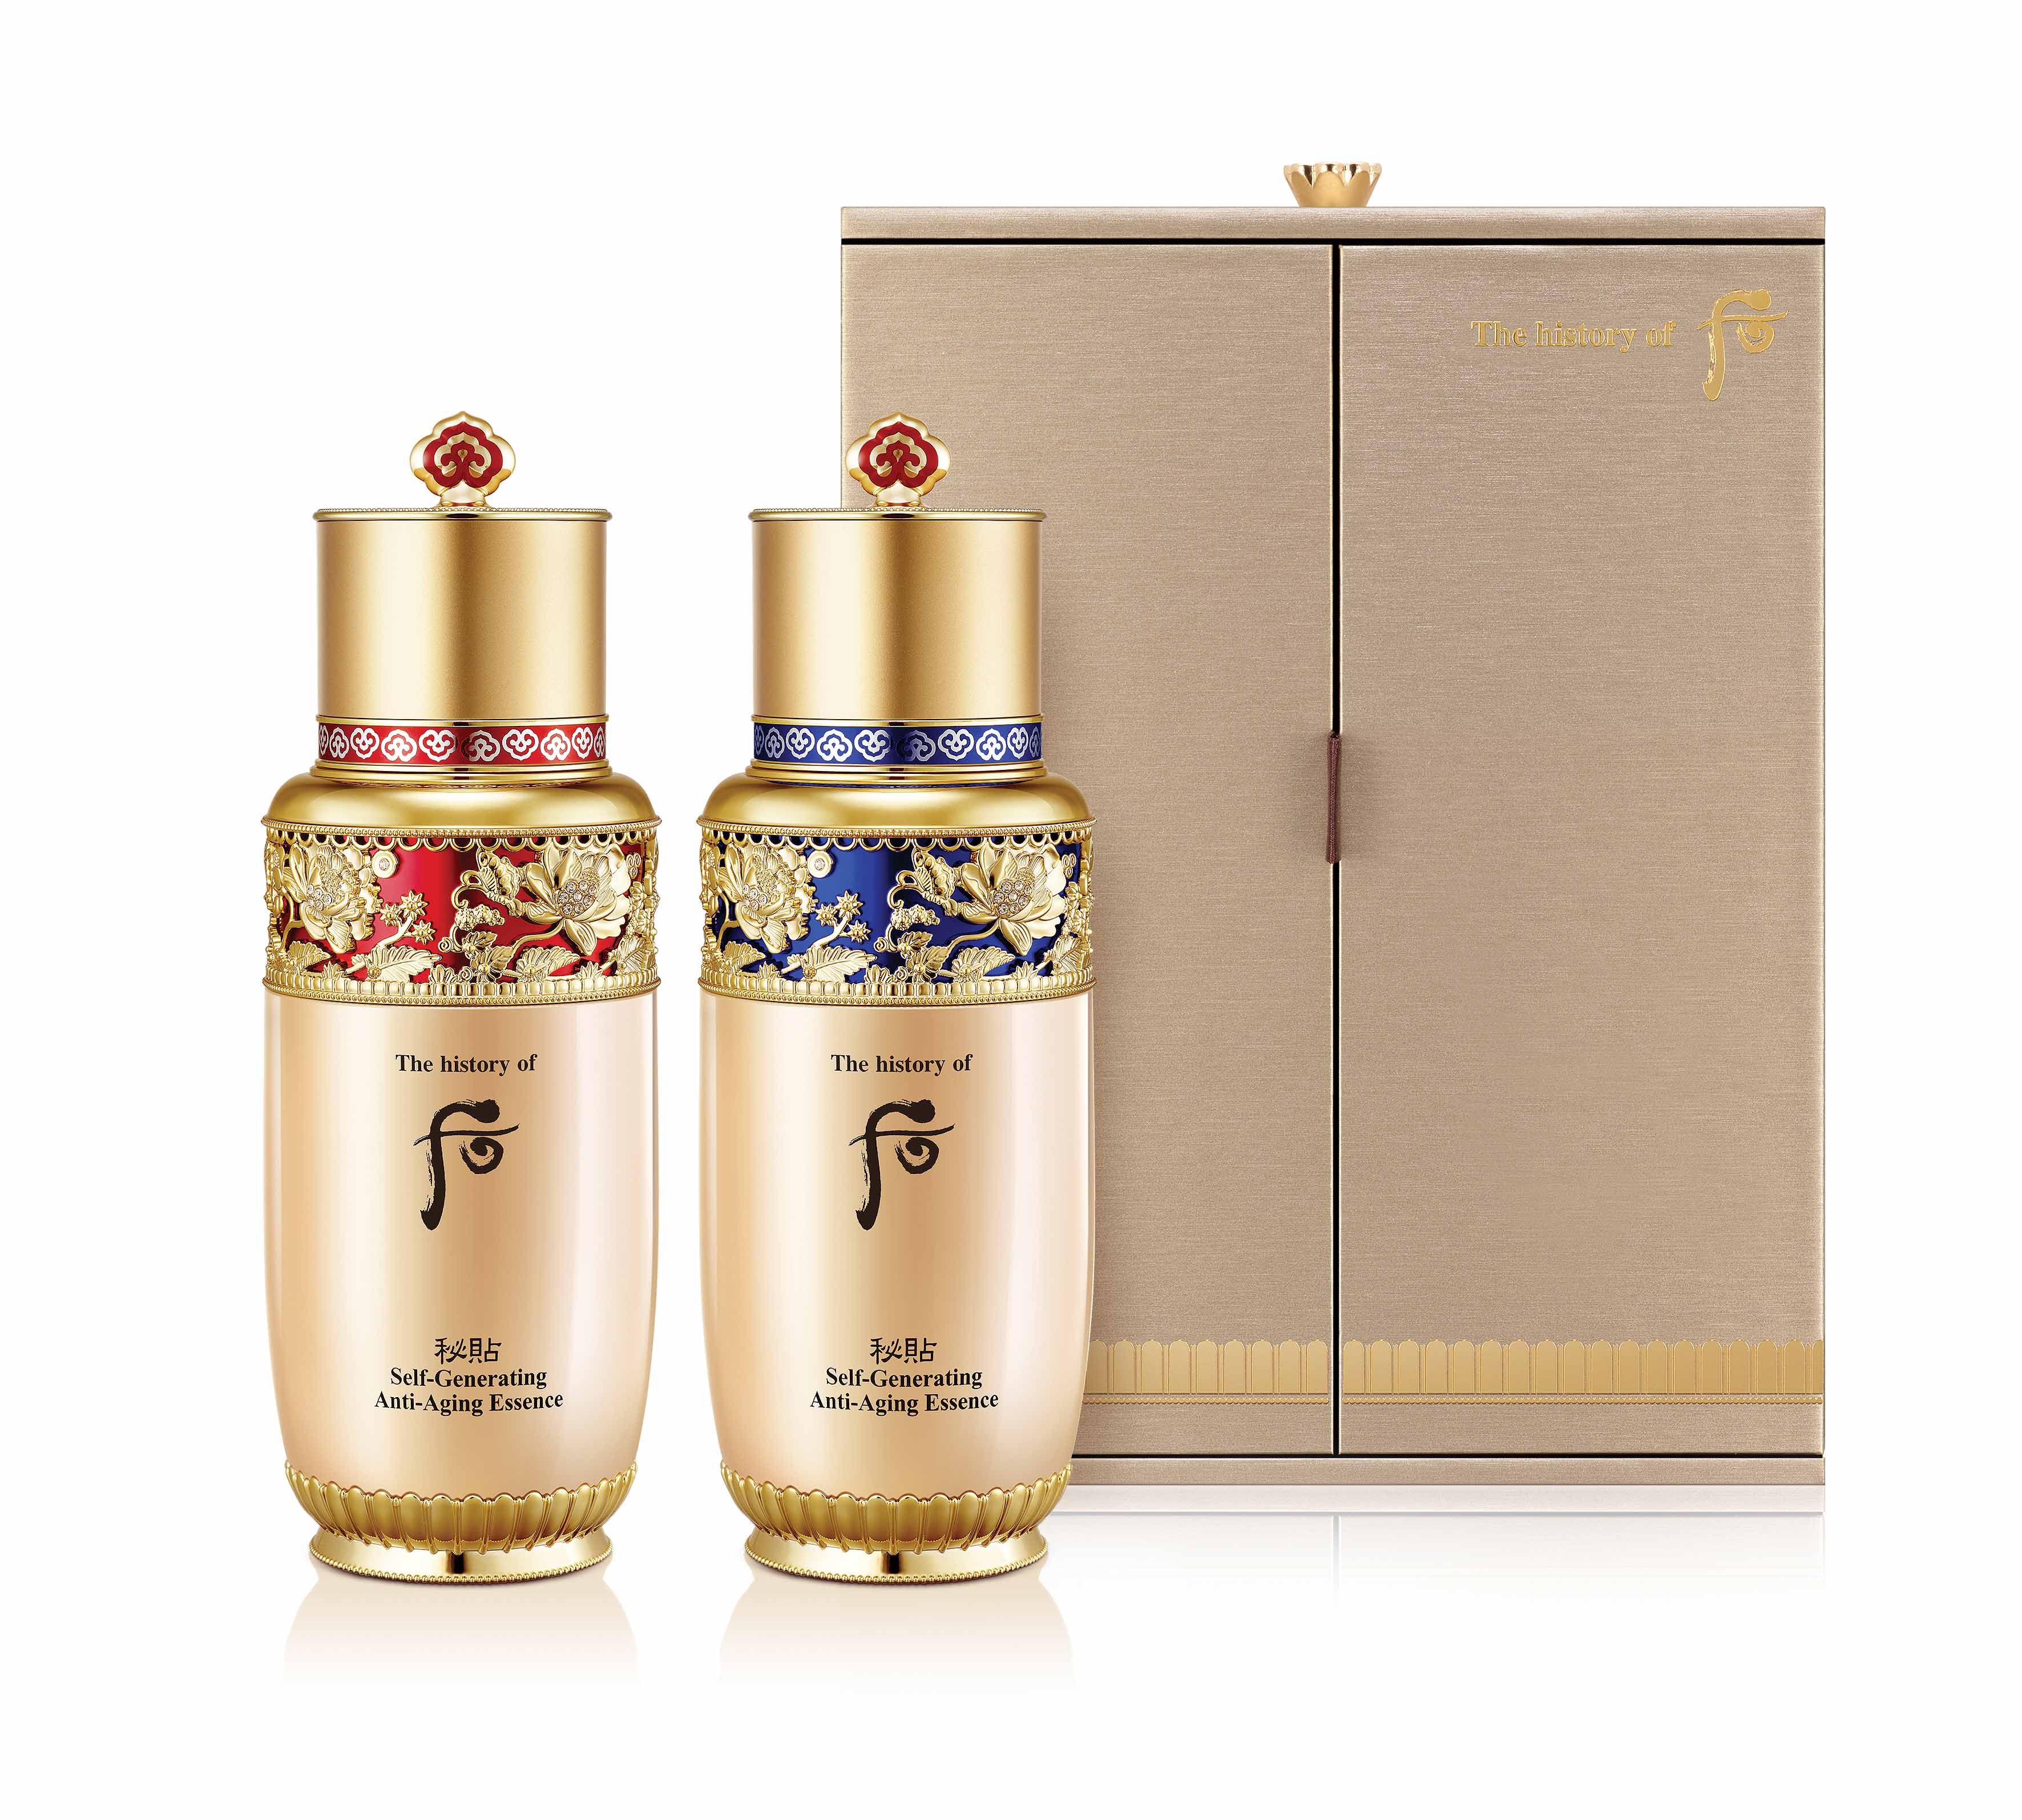 The history of Whoo 秘貼